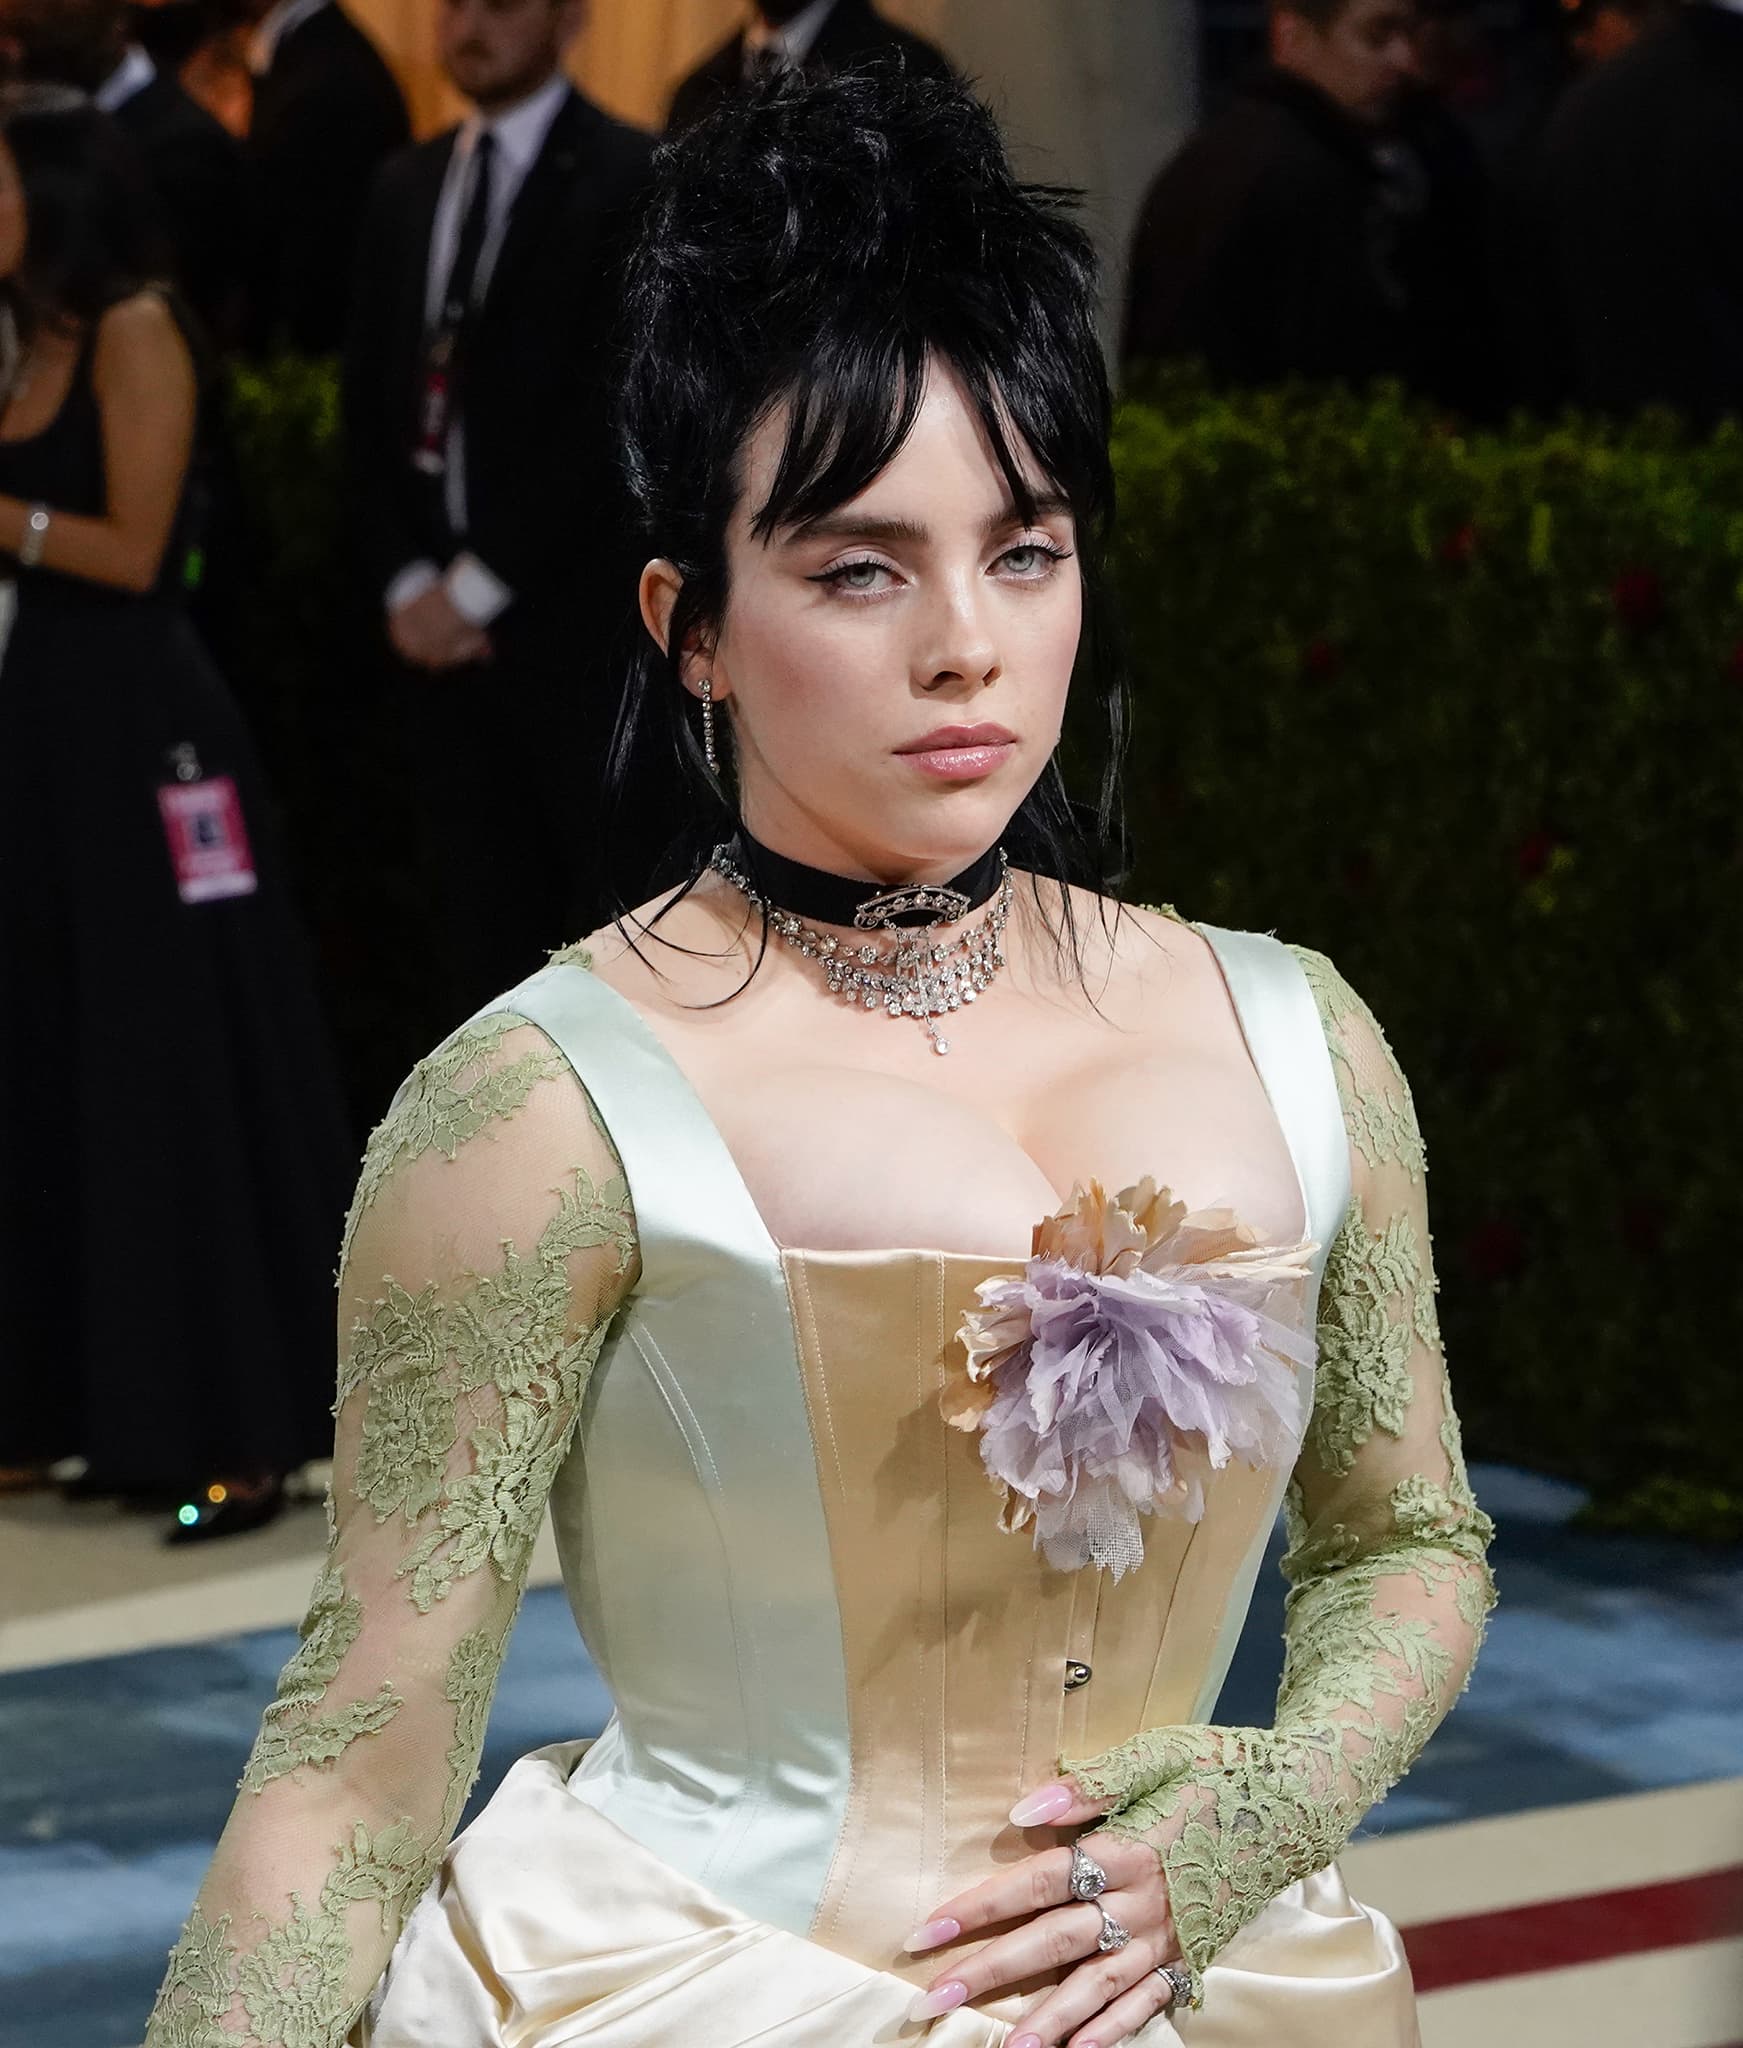 Billie Eilish completes her gothic gilded age look with a spiky fauxhawk and winged eyeliner